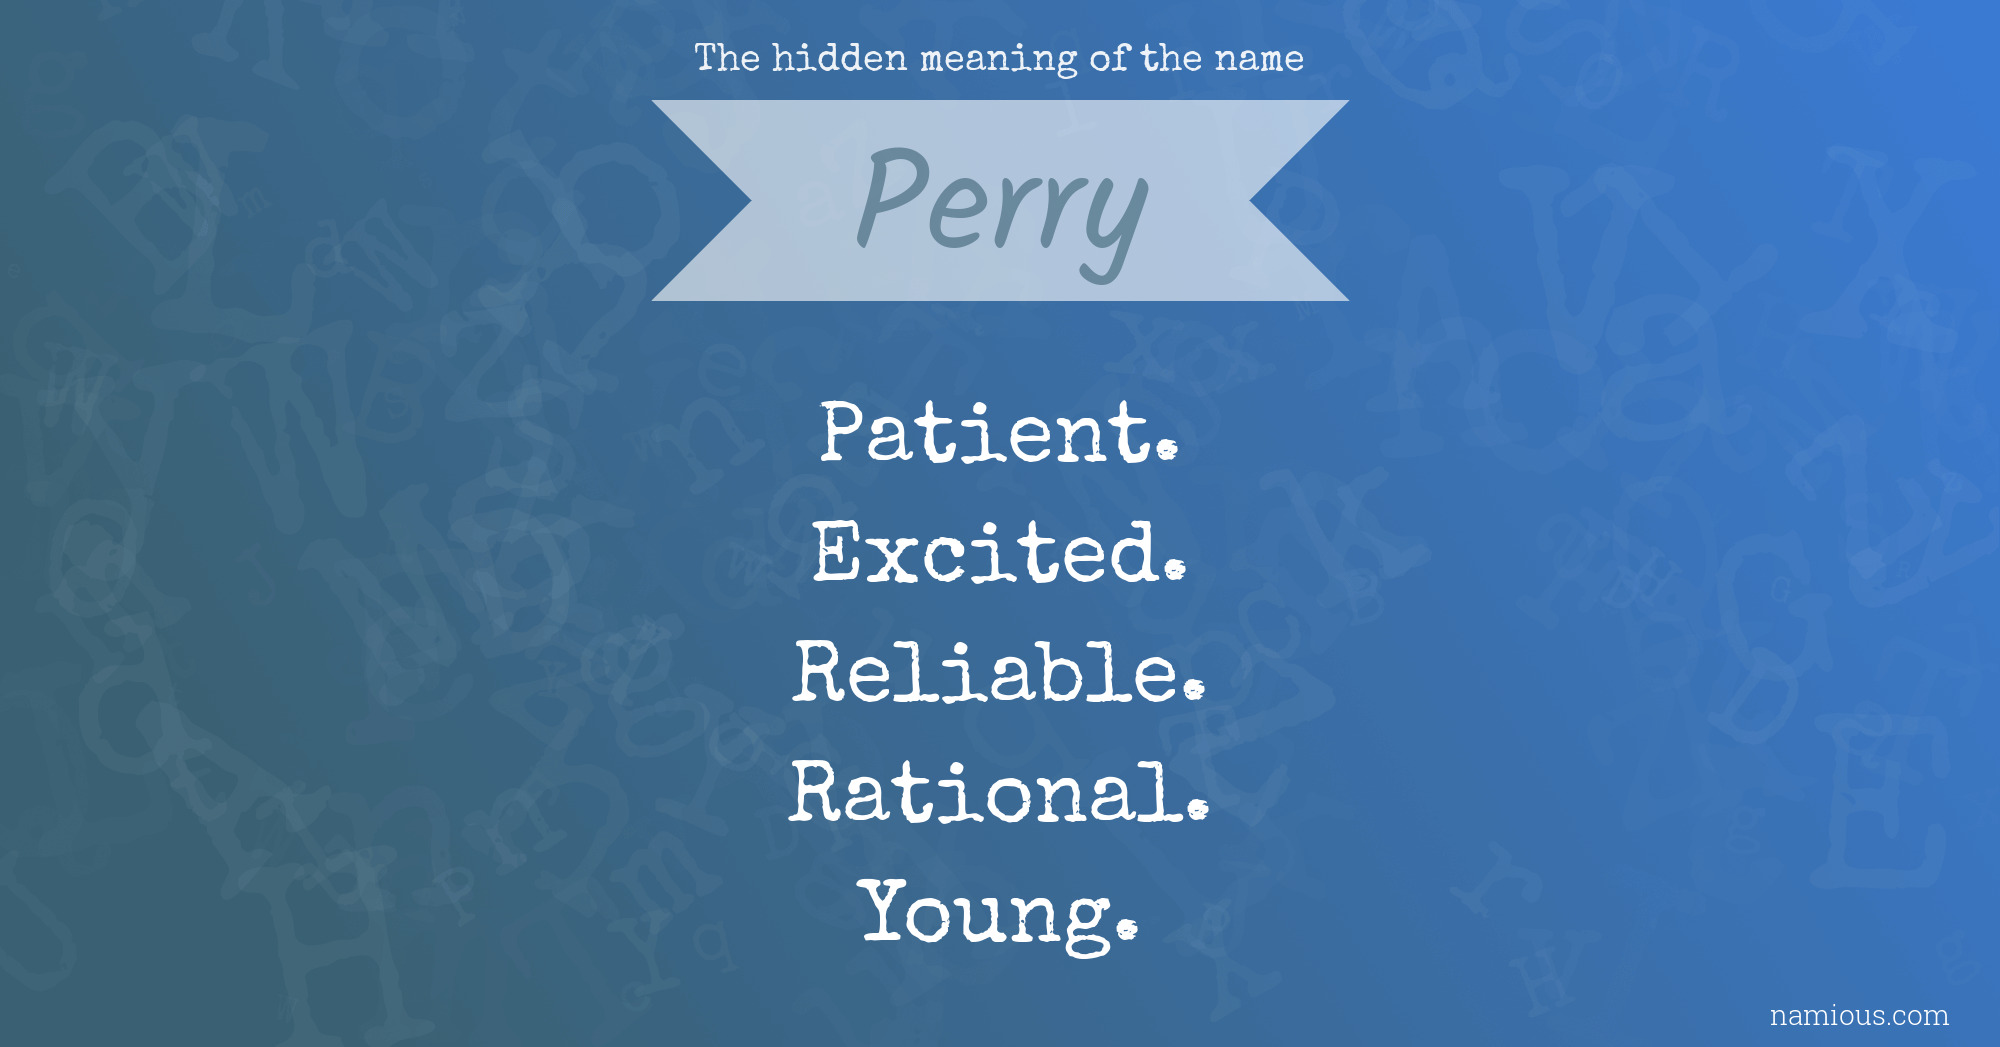 The hidden meaning of the name Perry